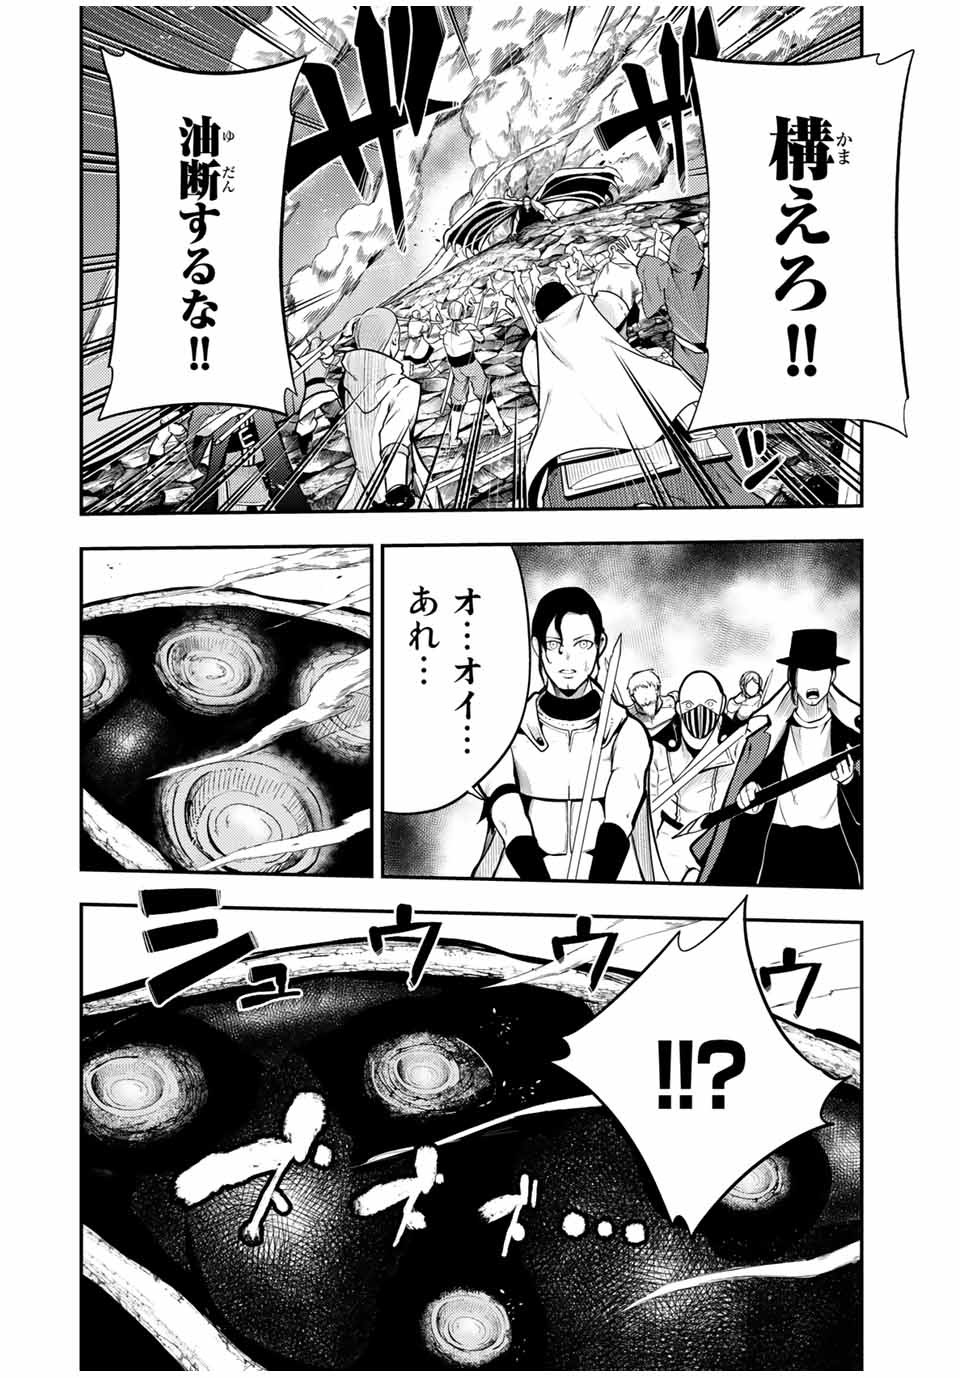 the strongest former prince-; 奴隷転生 ～その奴隷、最強の元王子につき～ 第57話 - Page 8